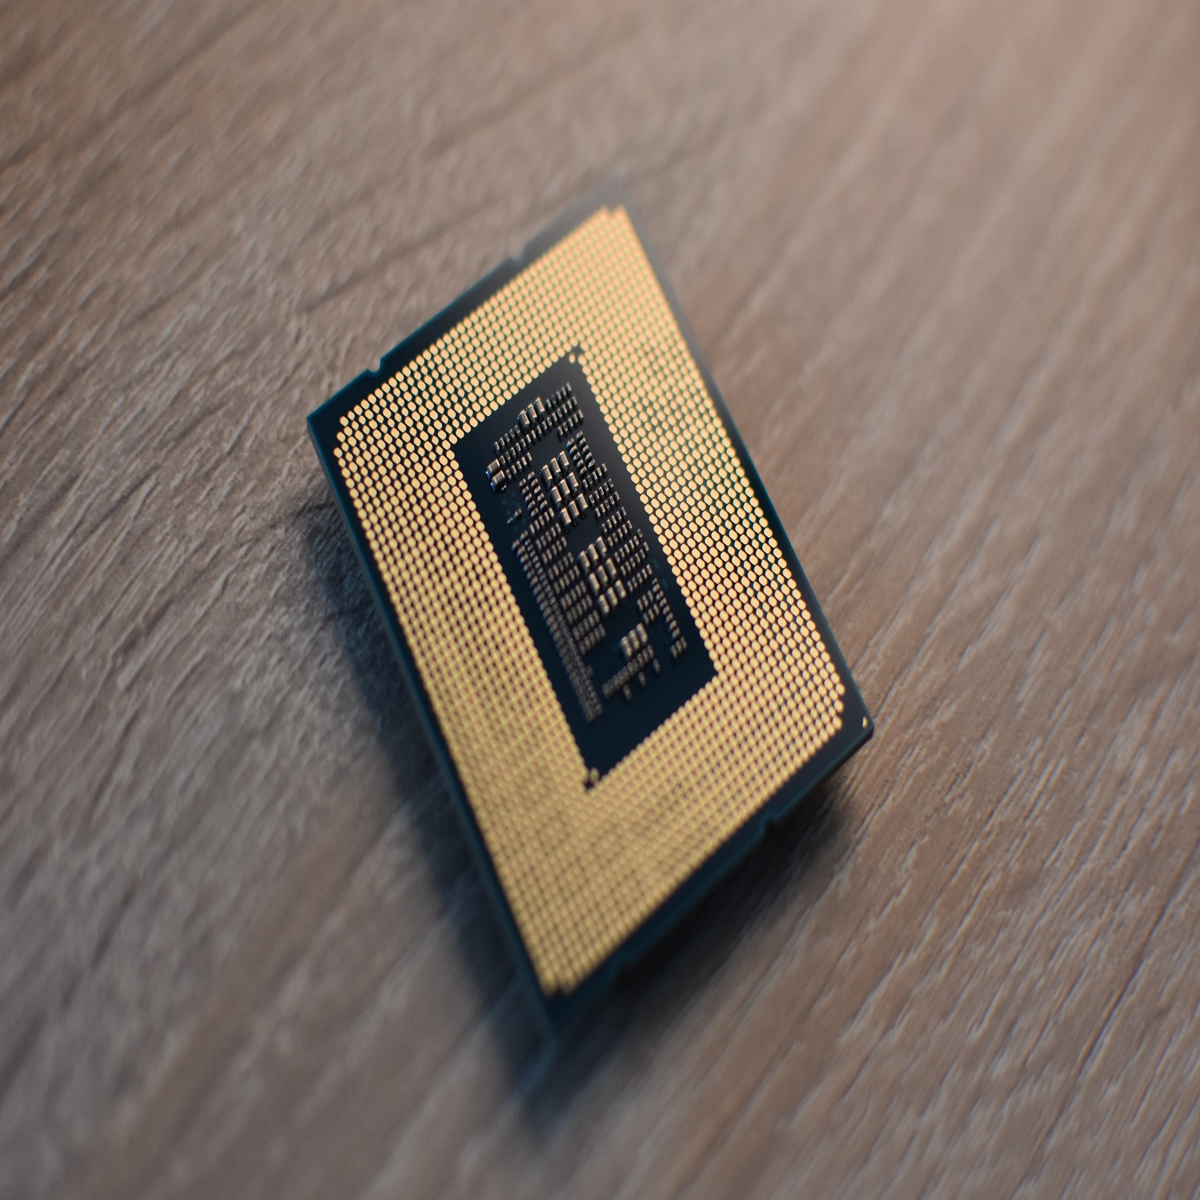 Intel's Core i3 12100F is a value champion CPU for gaming - and